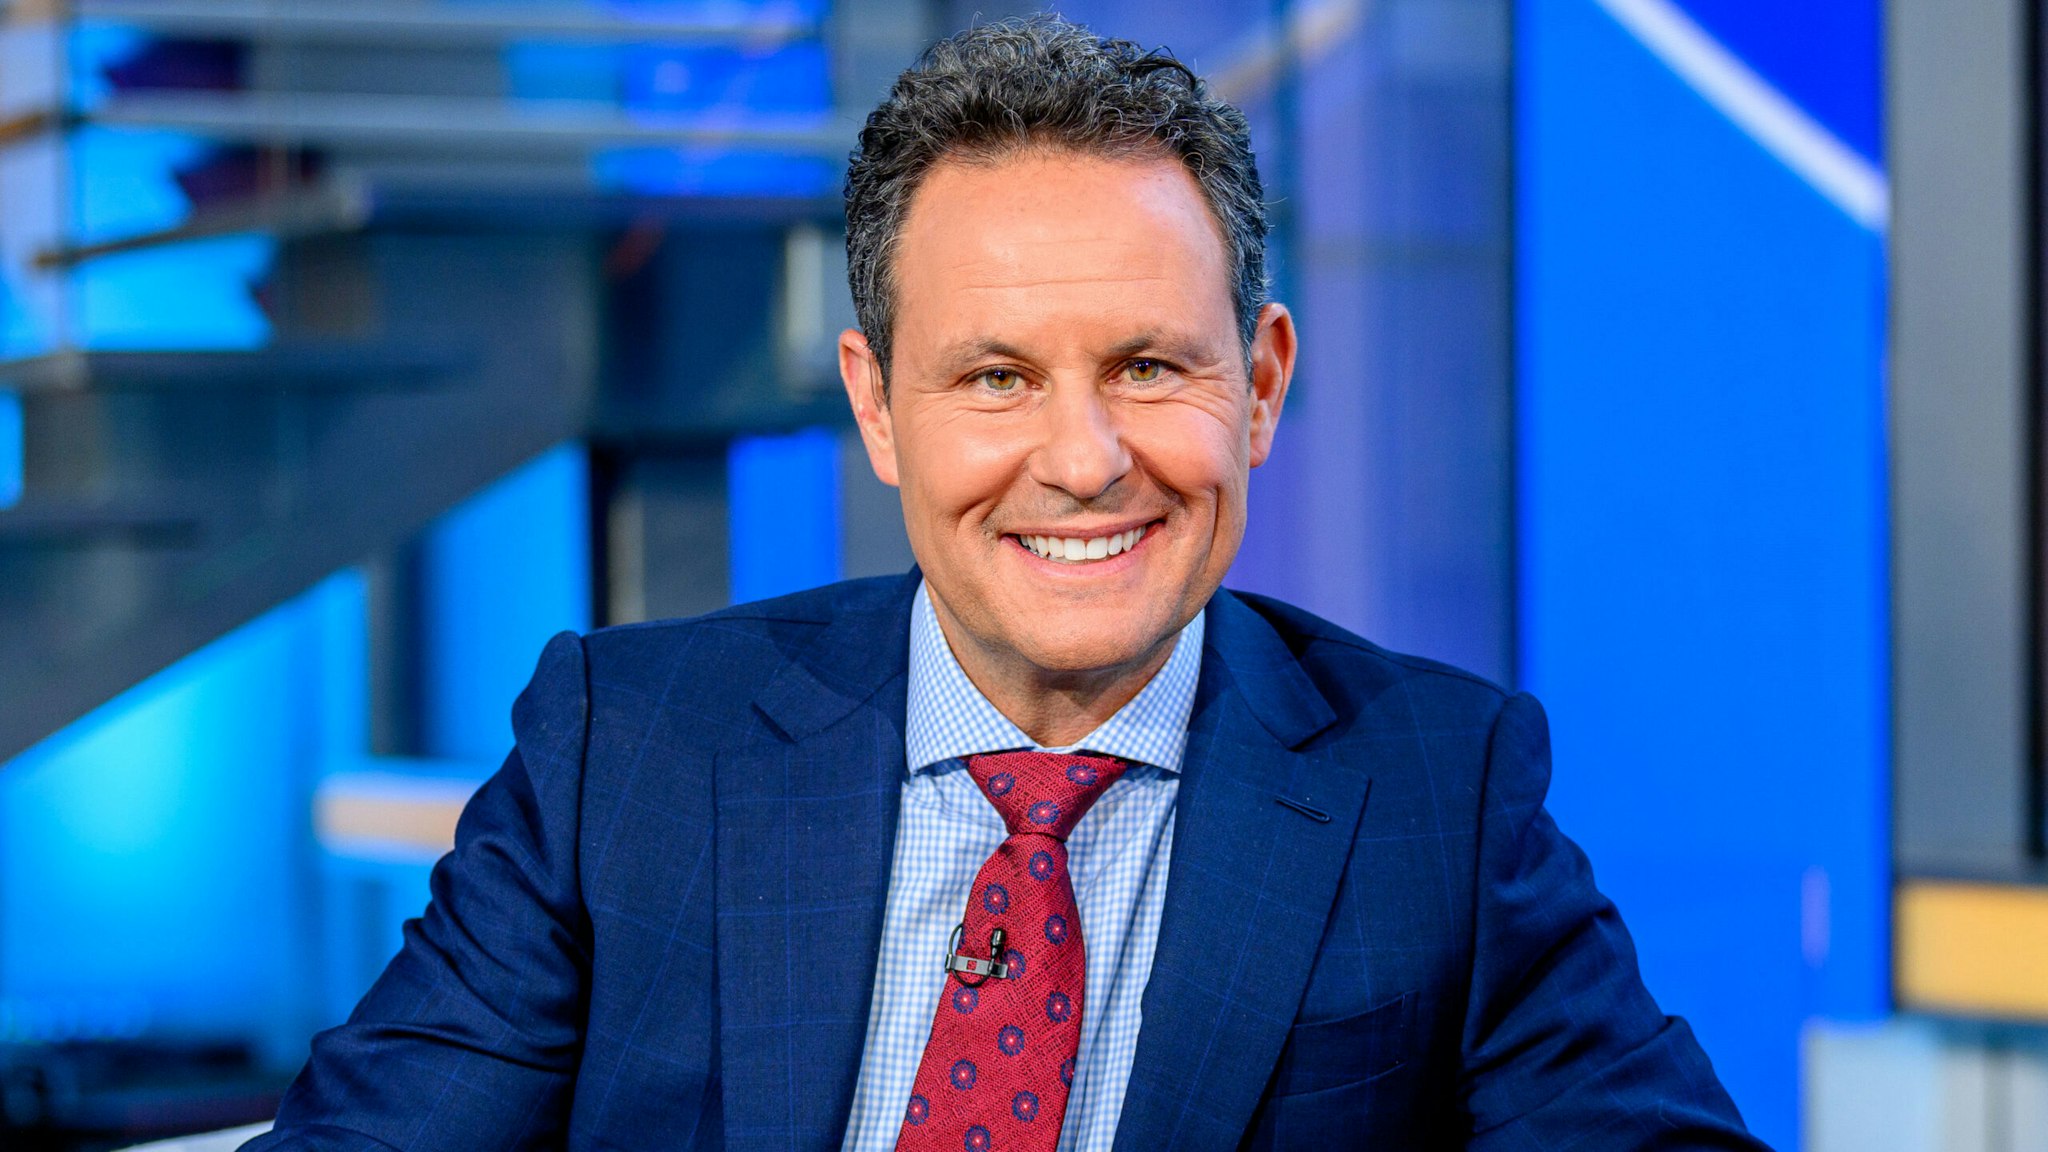 NEW YORK, NEW YORK - MARCH 07: Host Brian Kilmeade as Jean Dolores Schmidt, also known as Sister Jean, visits "Fox &amp; Friends" at Fox News Studios on March 07, 2023 in New York City.